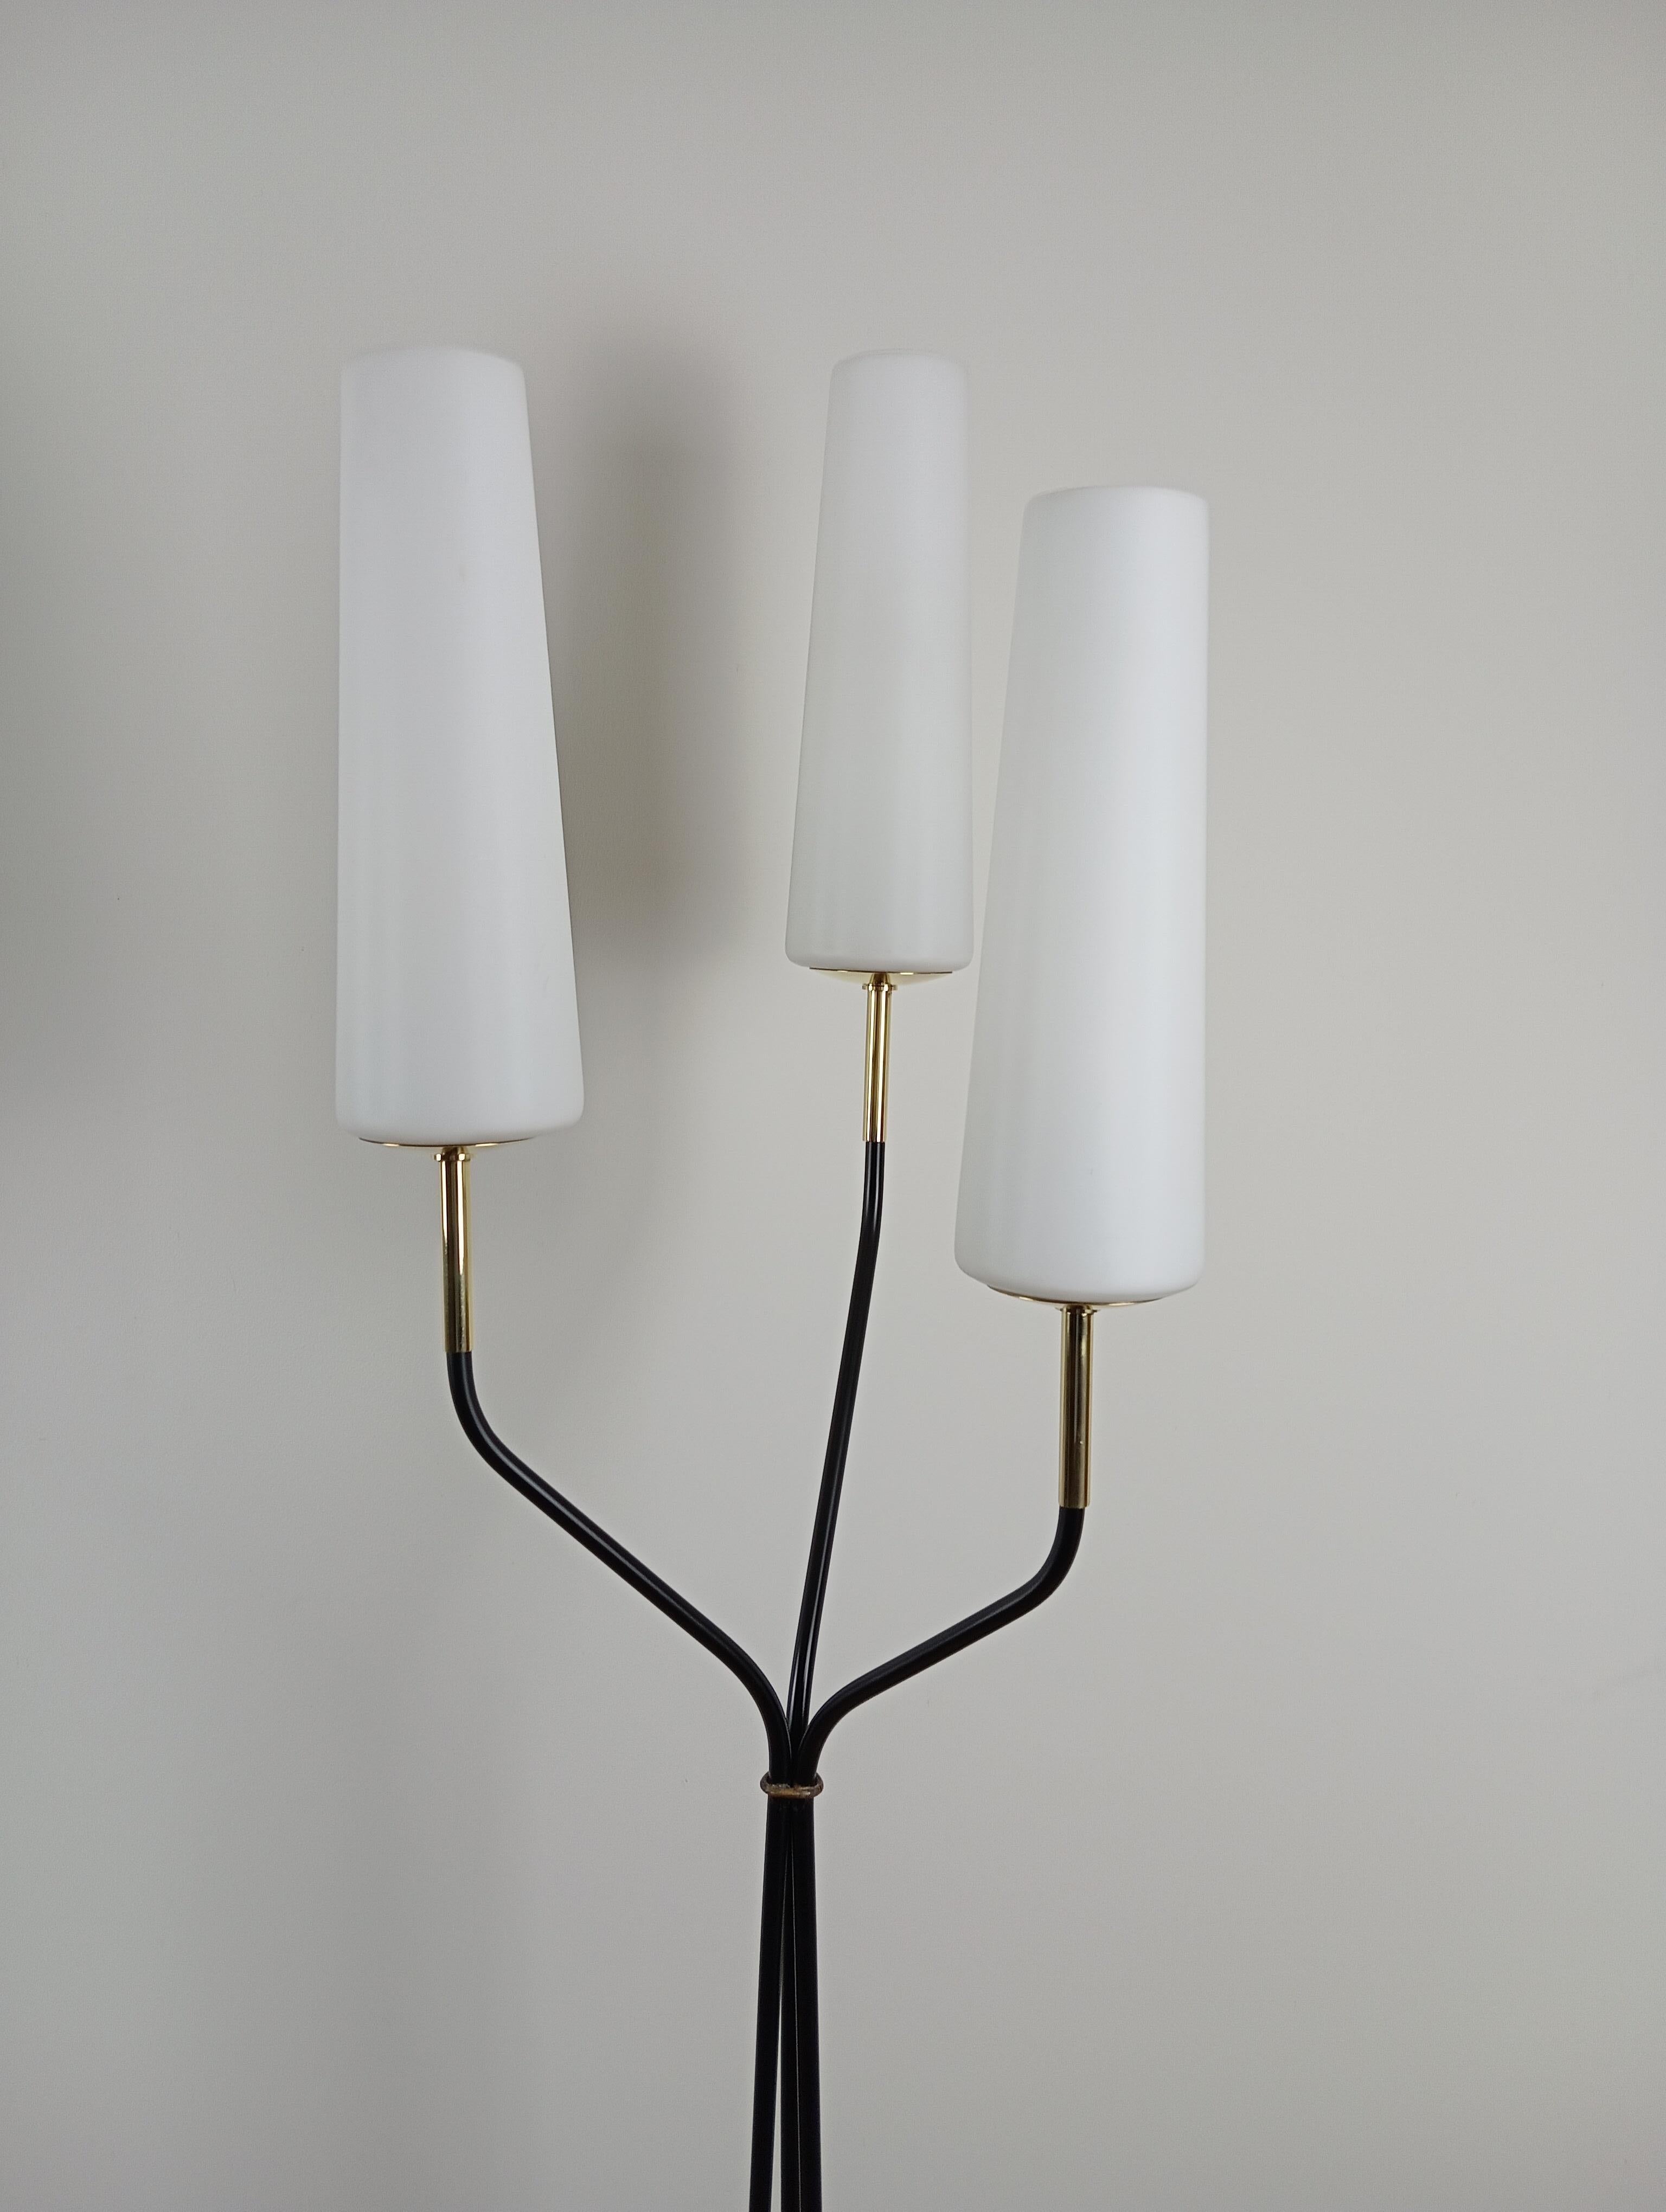 Floor lamp with 3 light arms, Maison Lunel circa 1950 For Sale 7